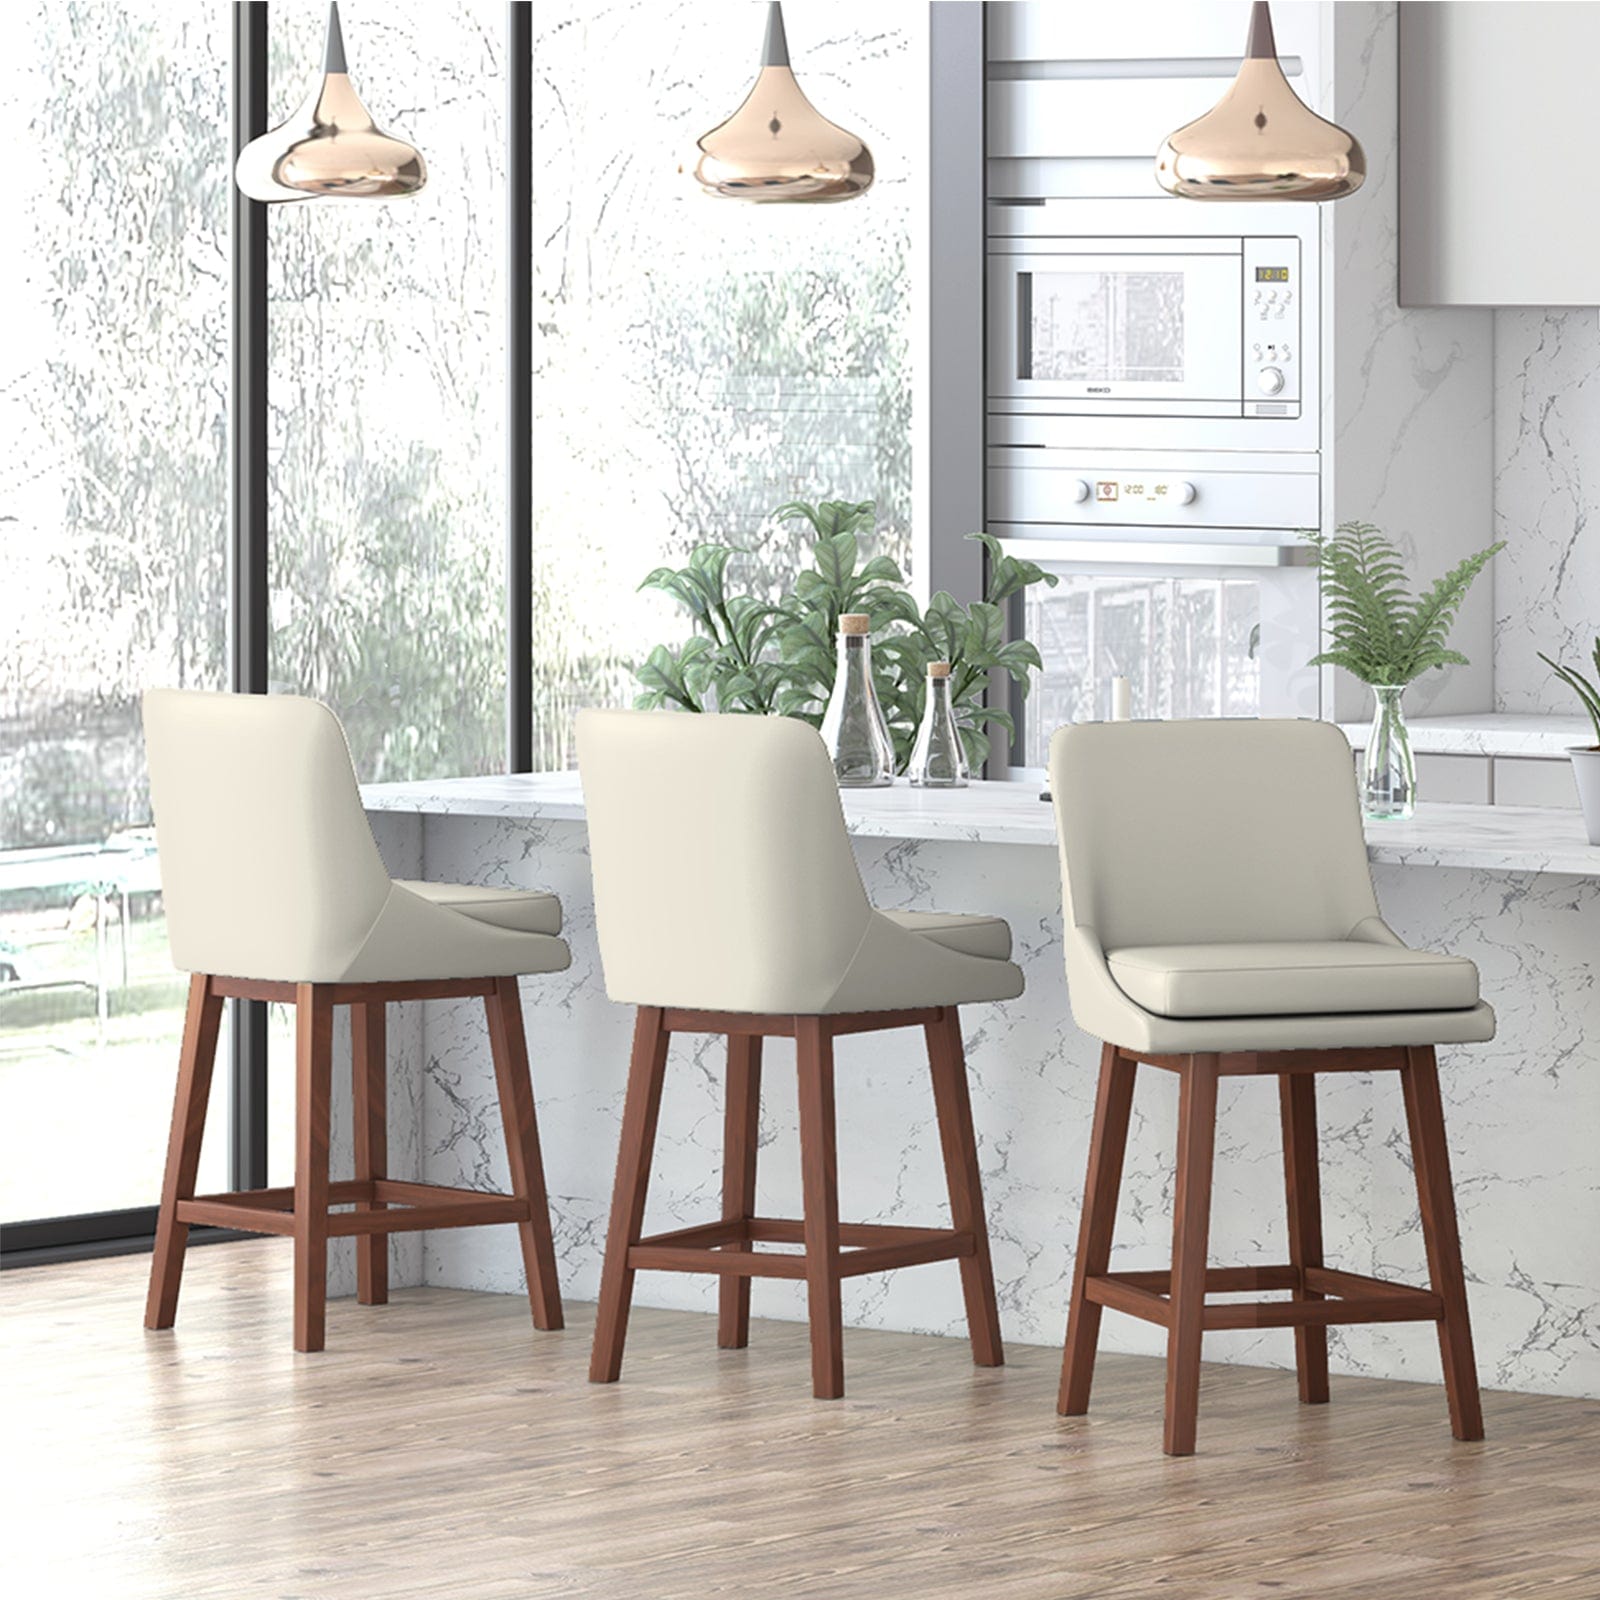 Barstool | Faux Leathe 360° Free Swivel Thicken Sponge Cushion Barstool Chair With Back And Footrest - uenjoychair